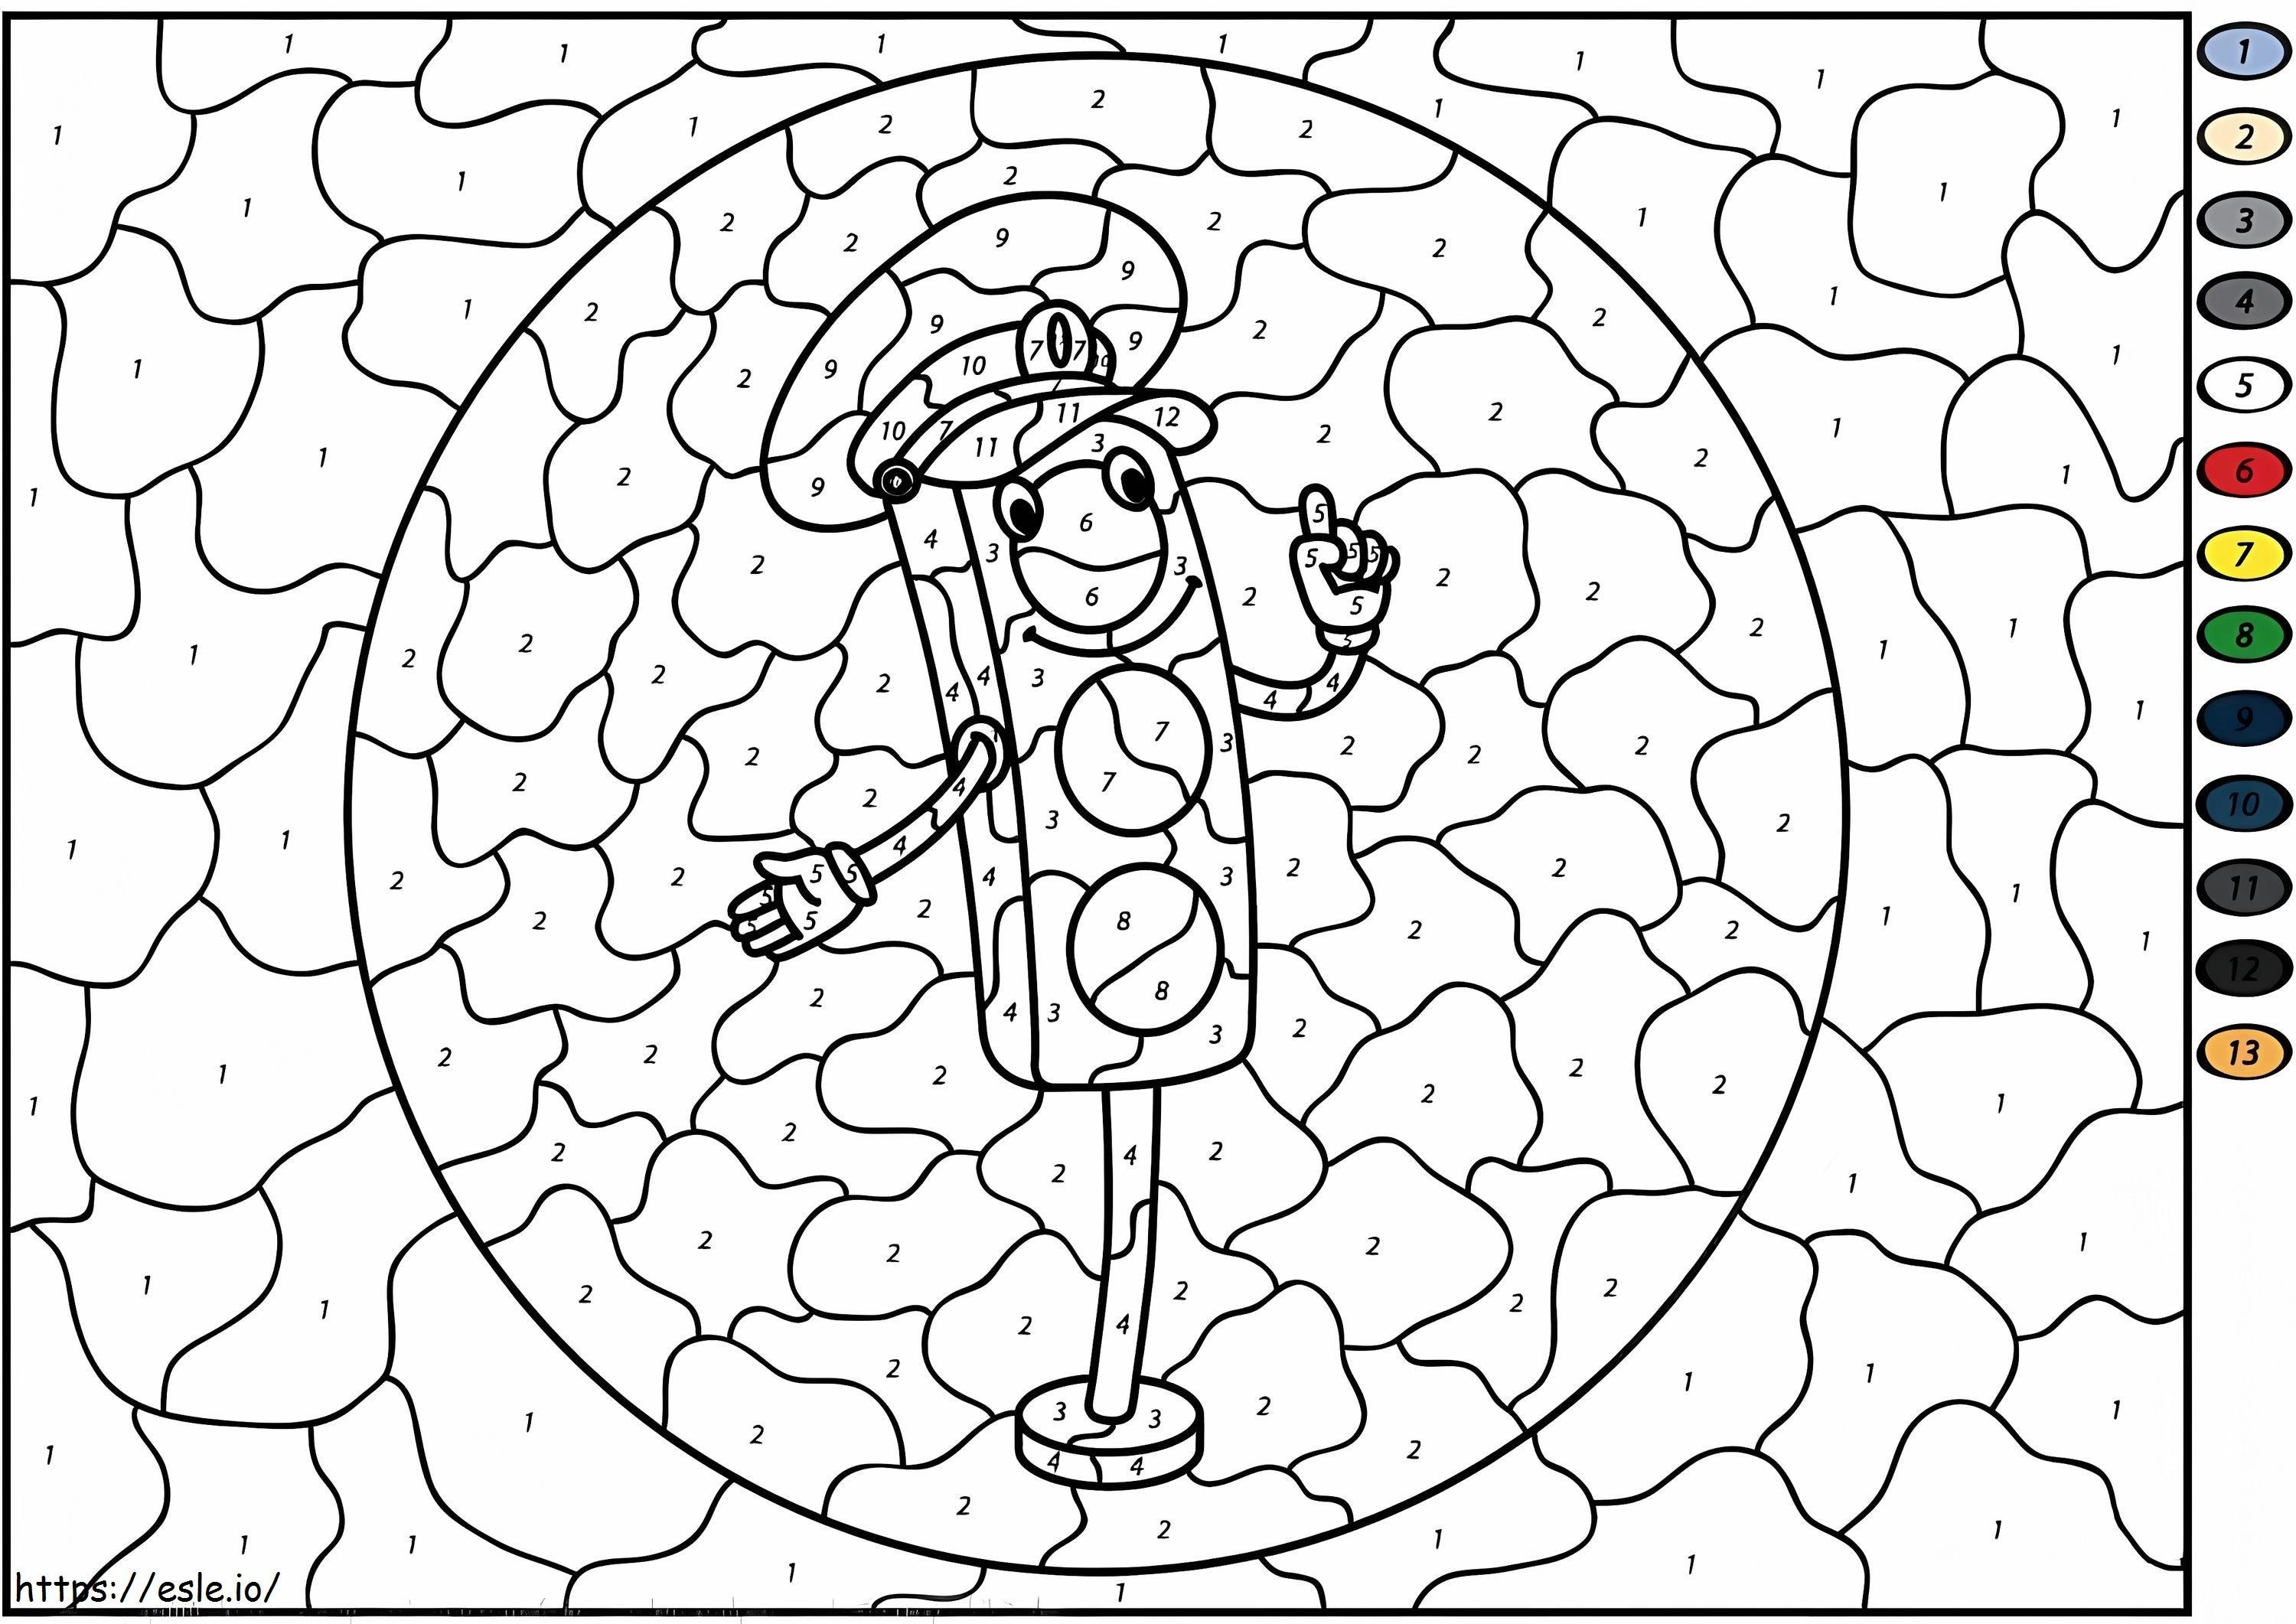 Traffic Light Color By Number coloring page